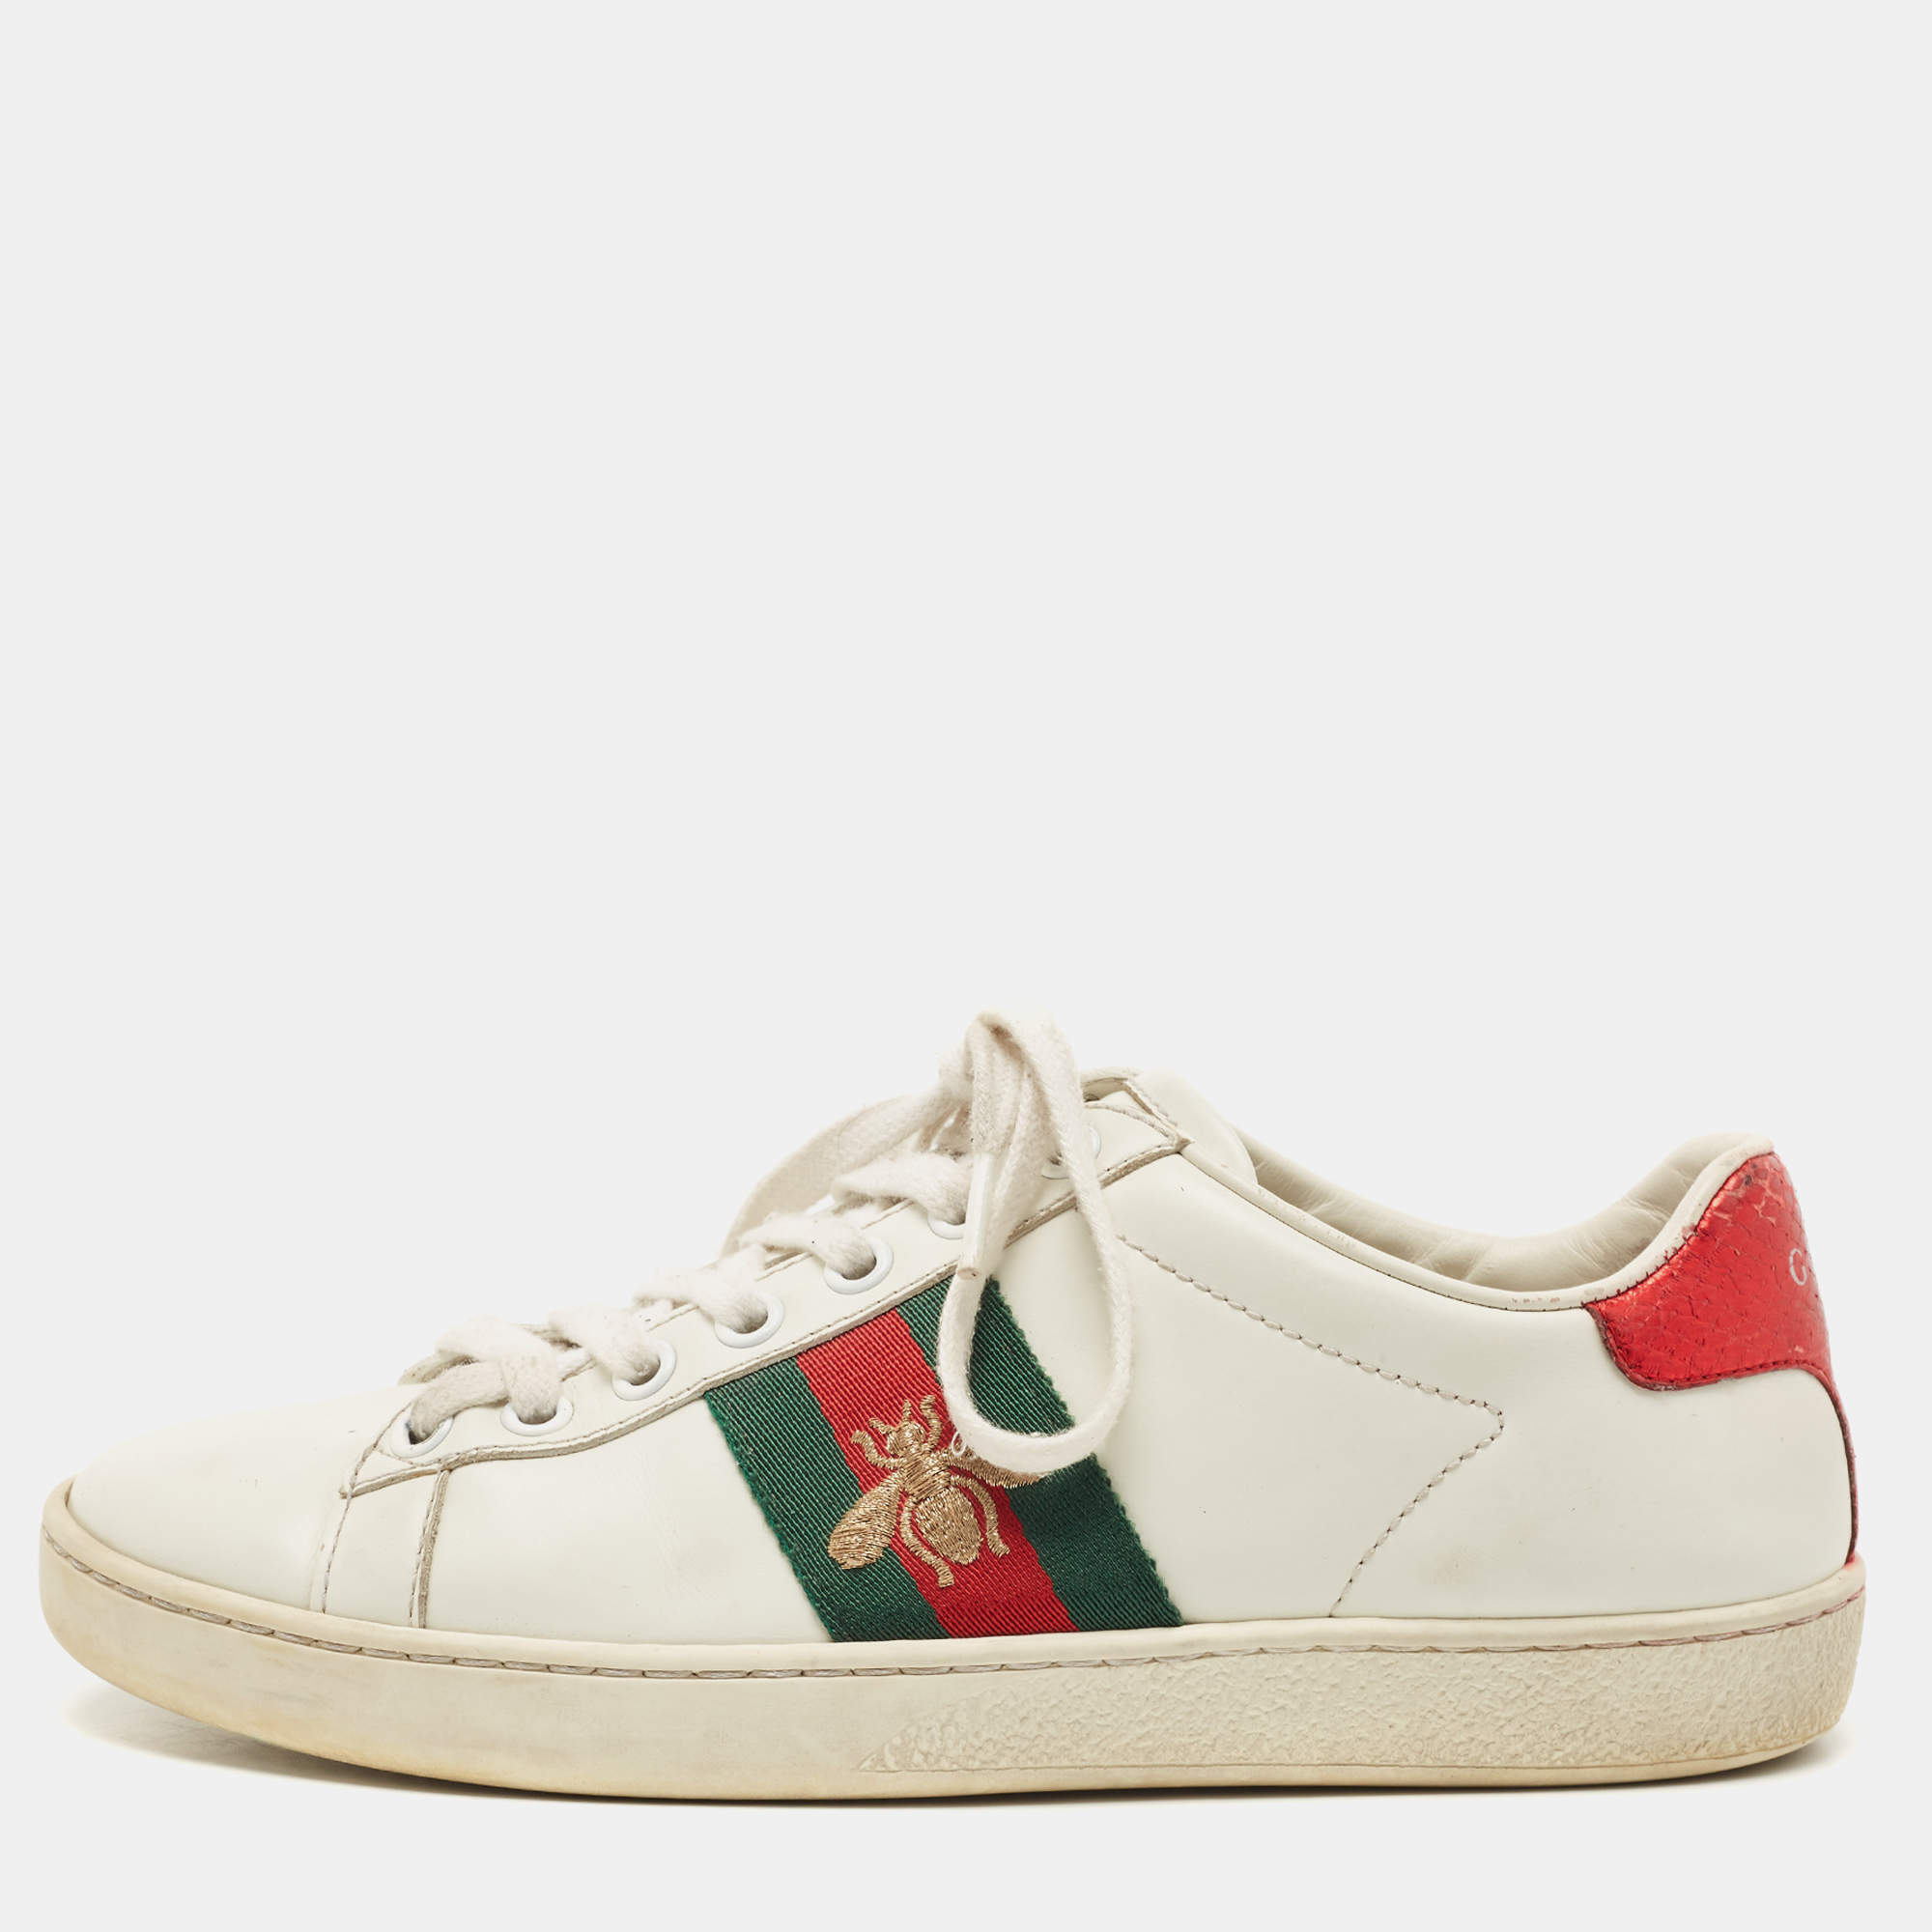 Gucci Silhouette -  New Zealand